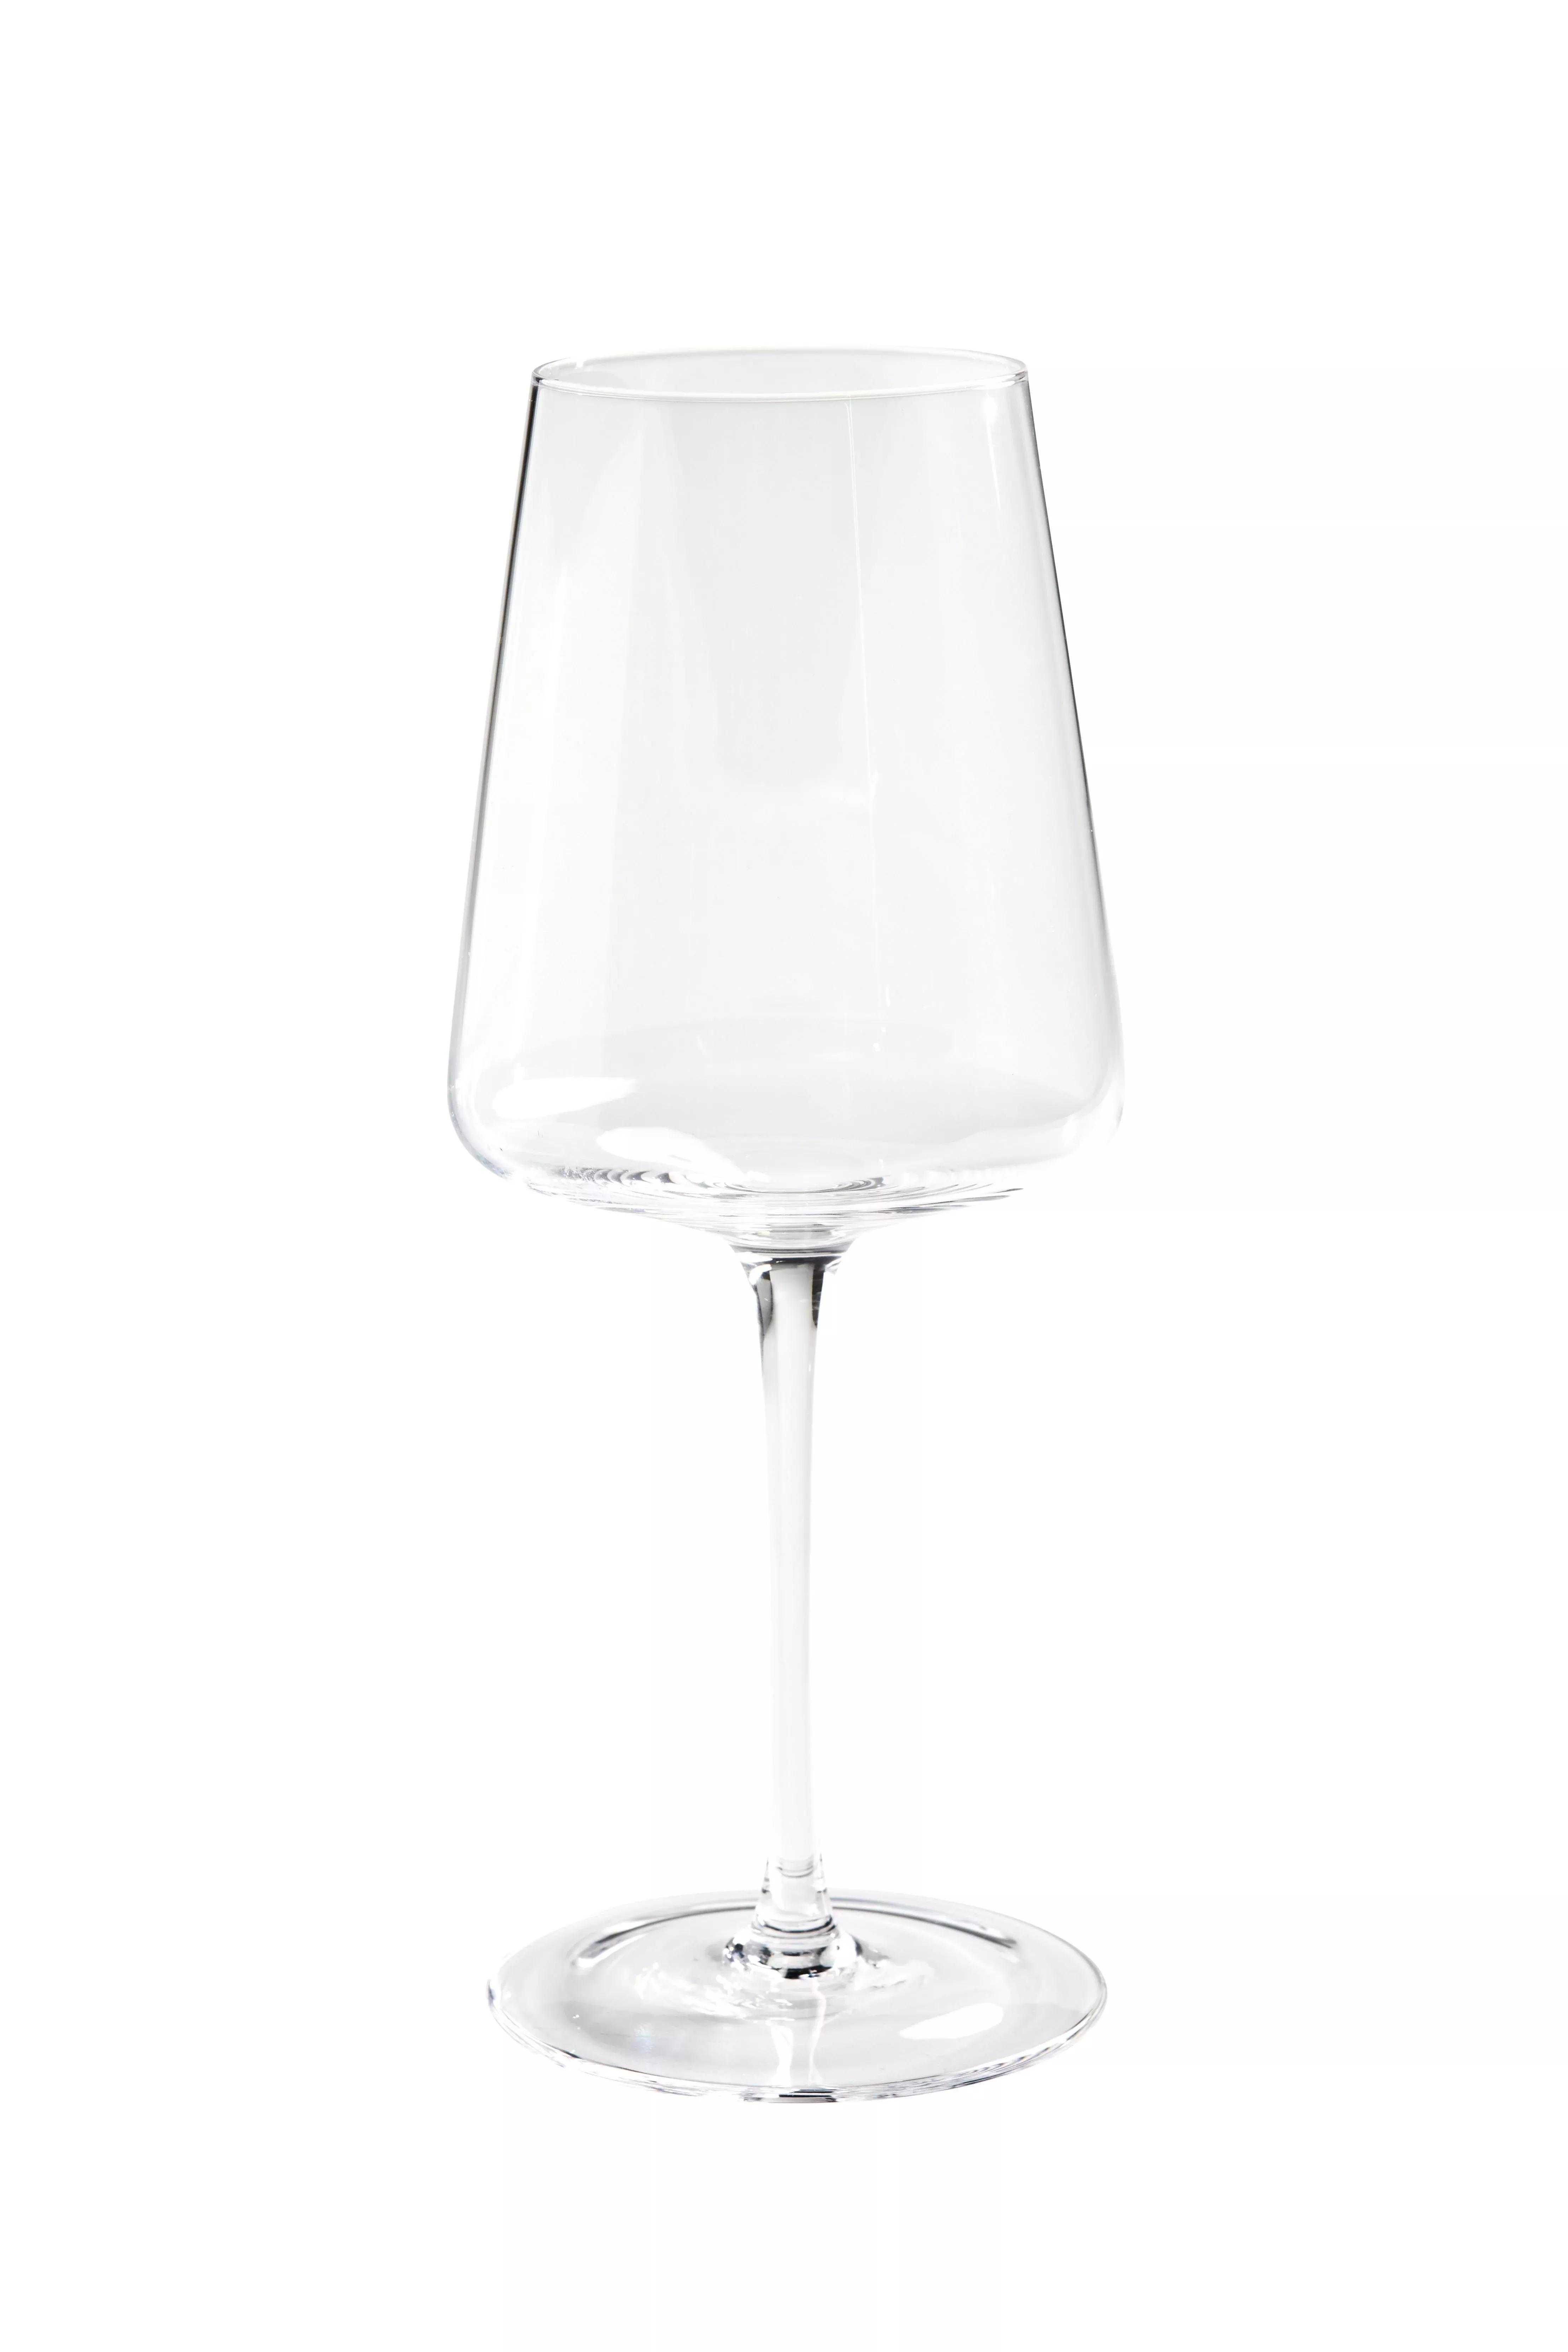 Better Homes & Gardens Clear Flared Red Wine Glass with Stem, 4